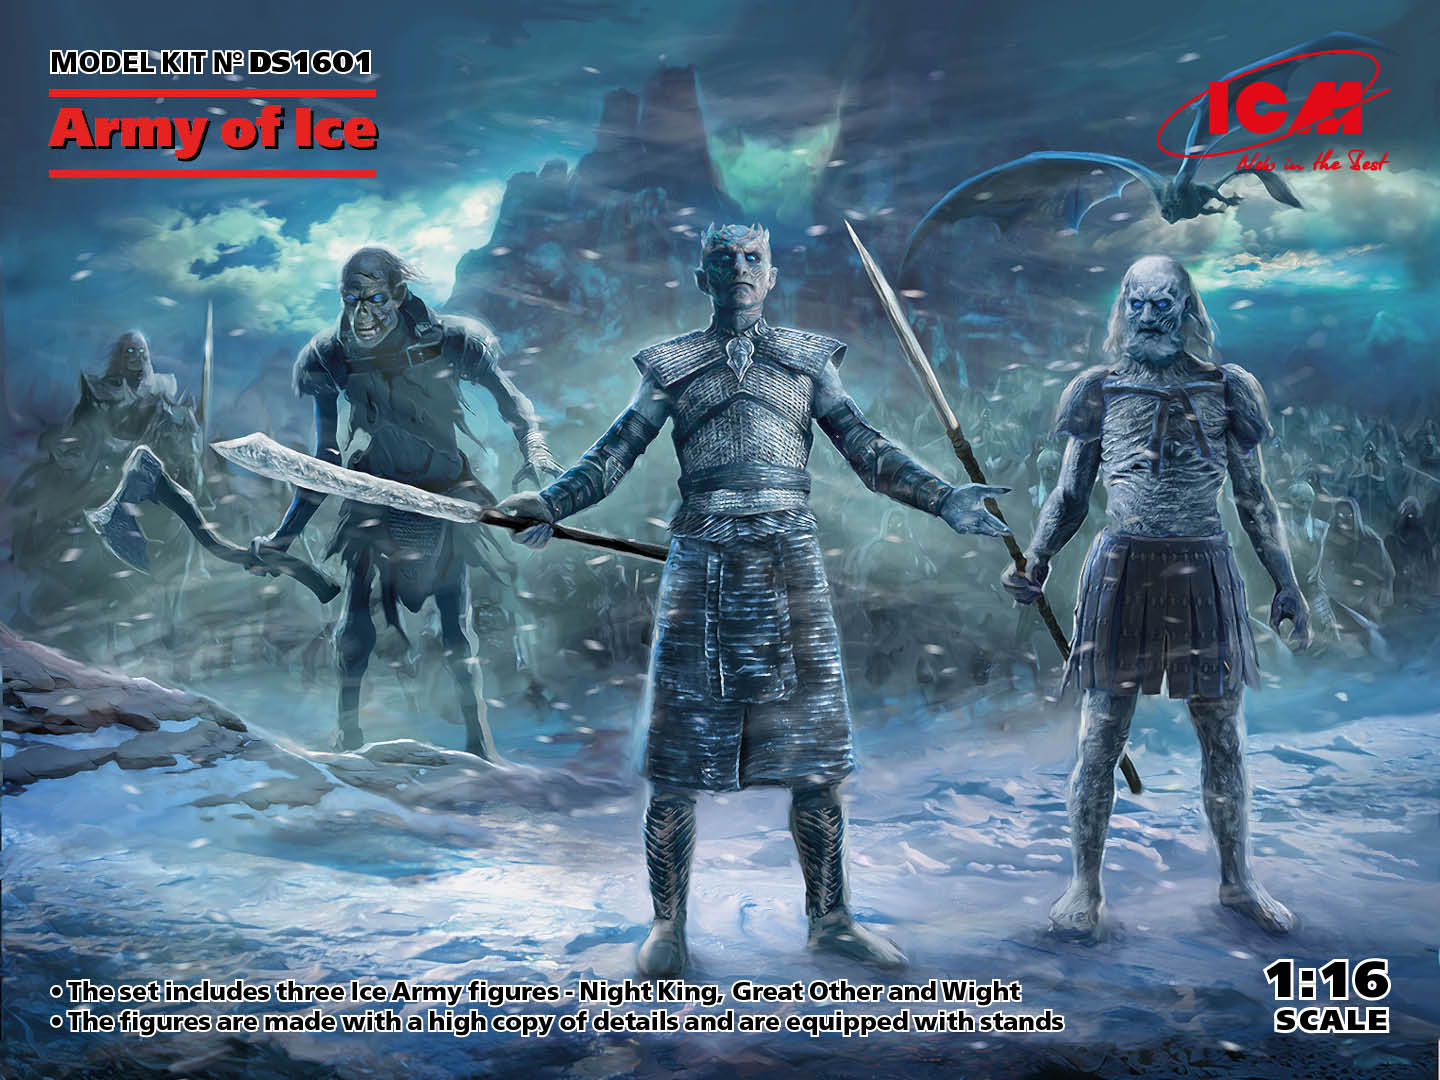 ICM DS1601 - 1:16 Army of Ice (Night King, Great Other, Wight) - Neu